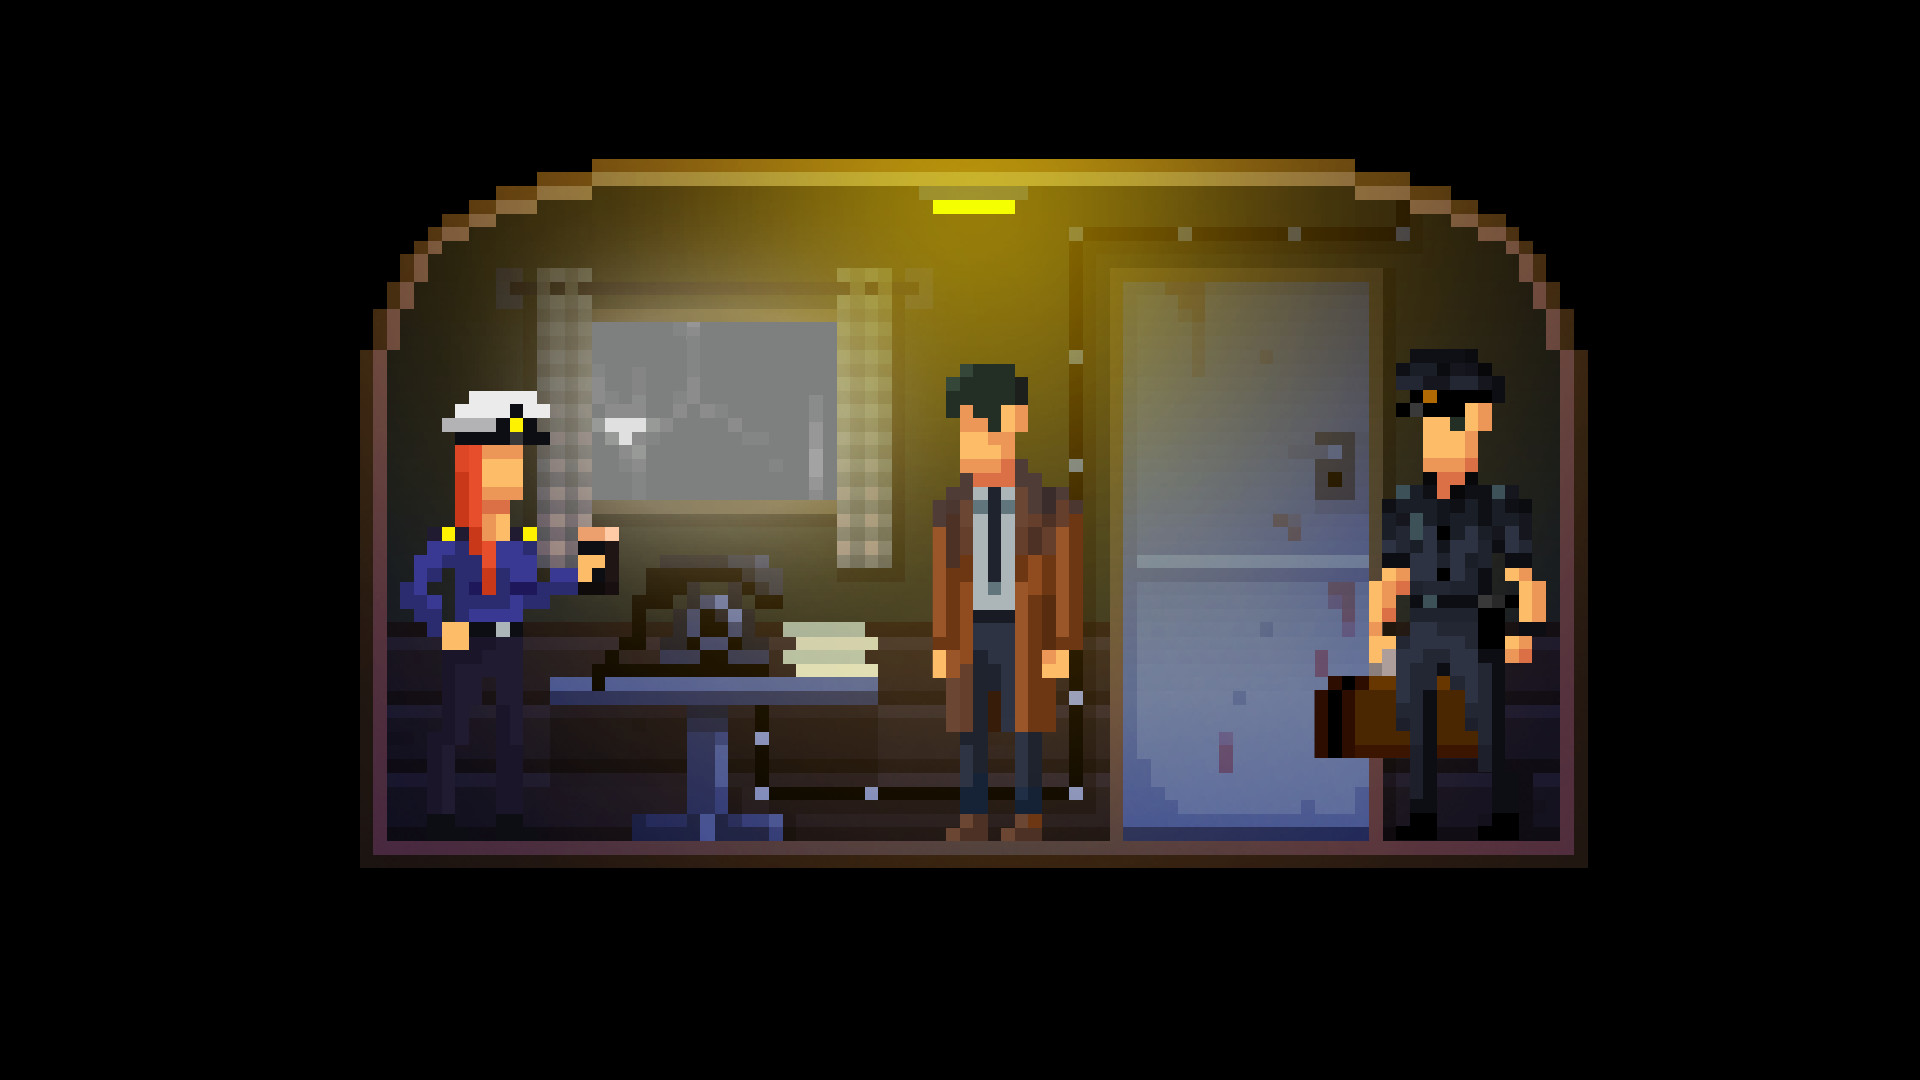 The Darkside Detective: A Fumble In The Dark Steam CD Key